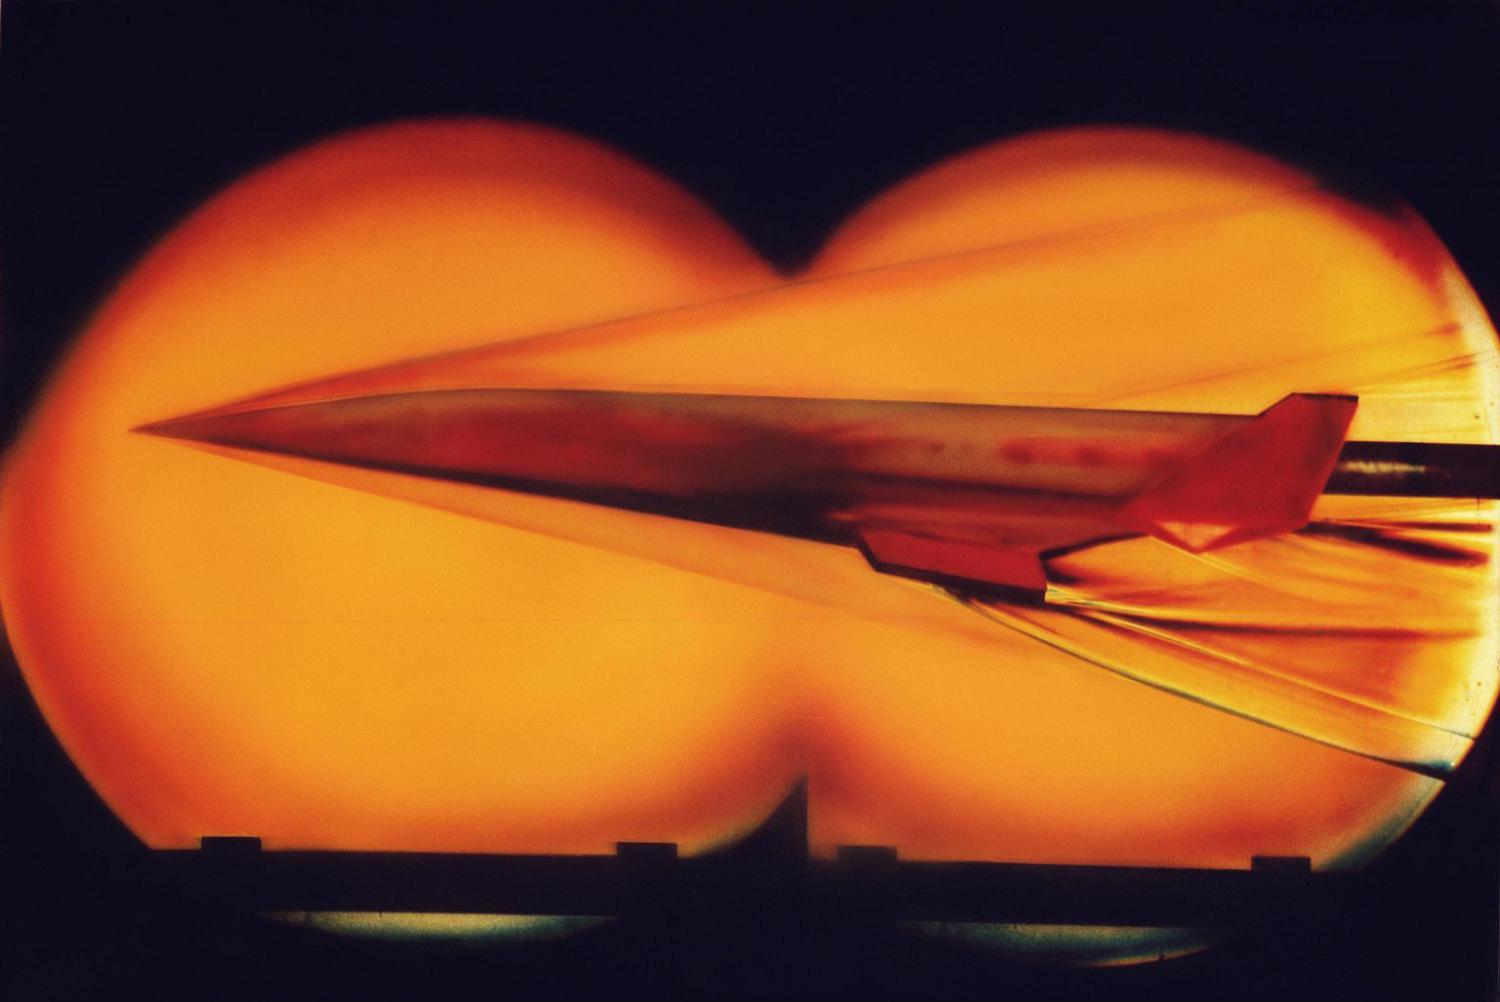 A model hypersonic craft undergoing tests in the 20 Inch Mach 6 Tunnel. Photograph published in Winds of Change, 75th Anniversary NASA publication, (pages 114-115), by James Schultz.